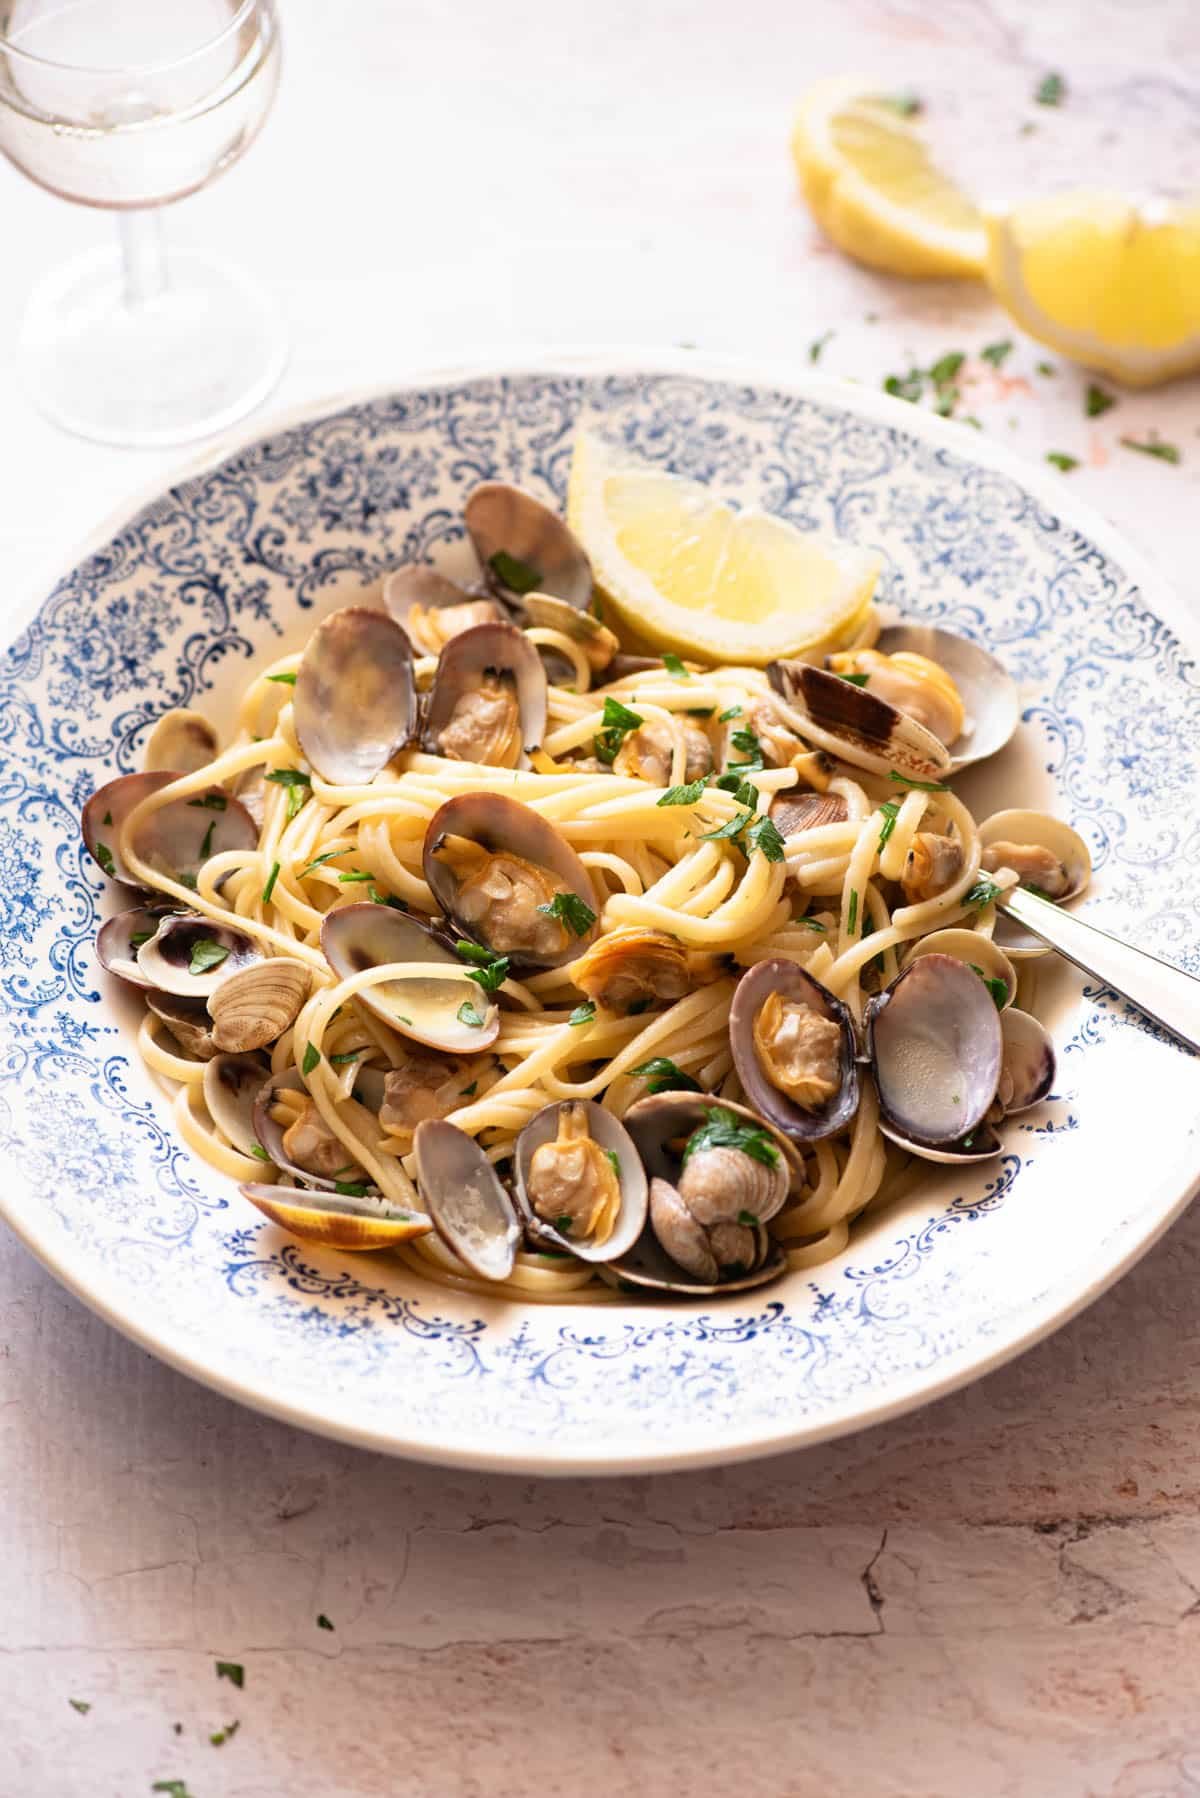 Linguine alle Vongole in a blue bowl with a slice of lemon at the side.